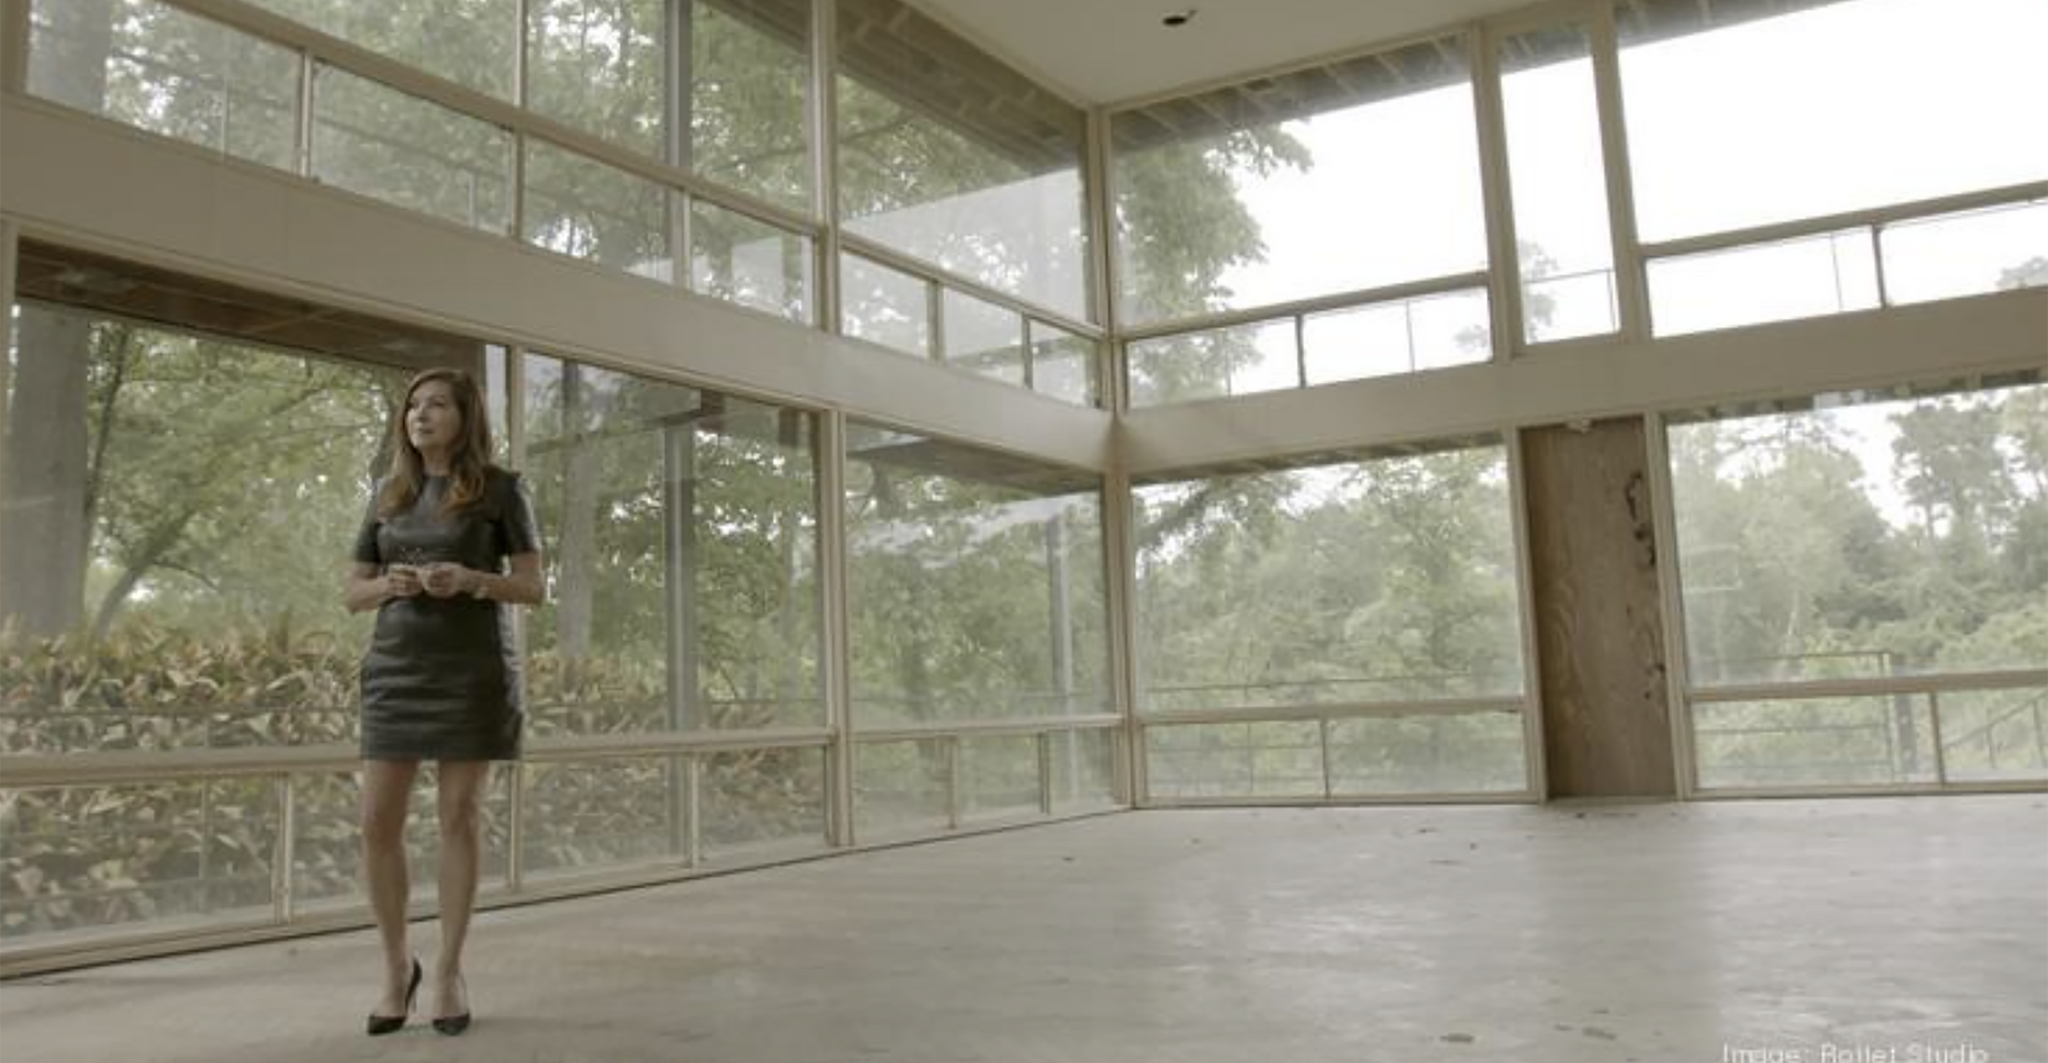 Lauren Rottet stands in the new Briarforest building